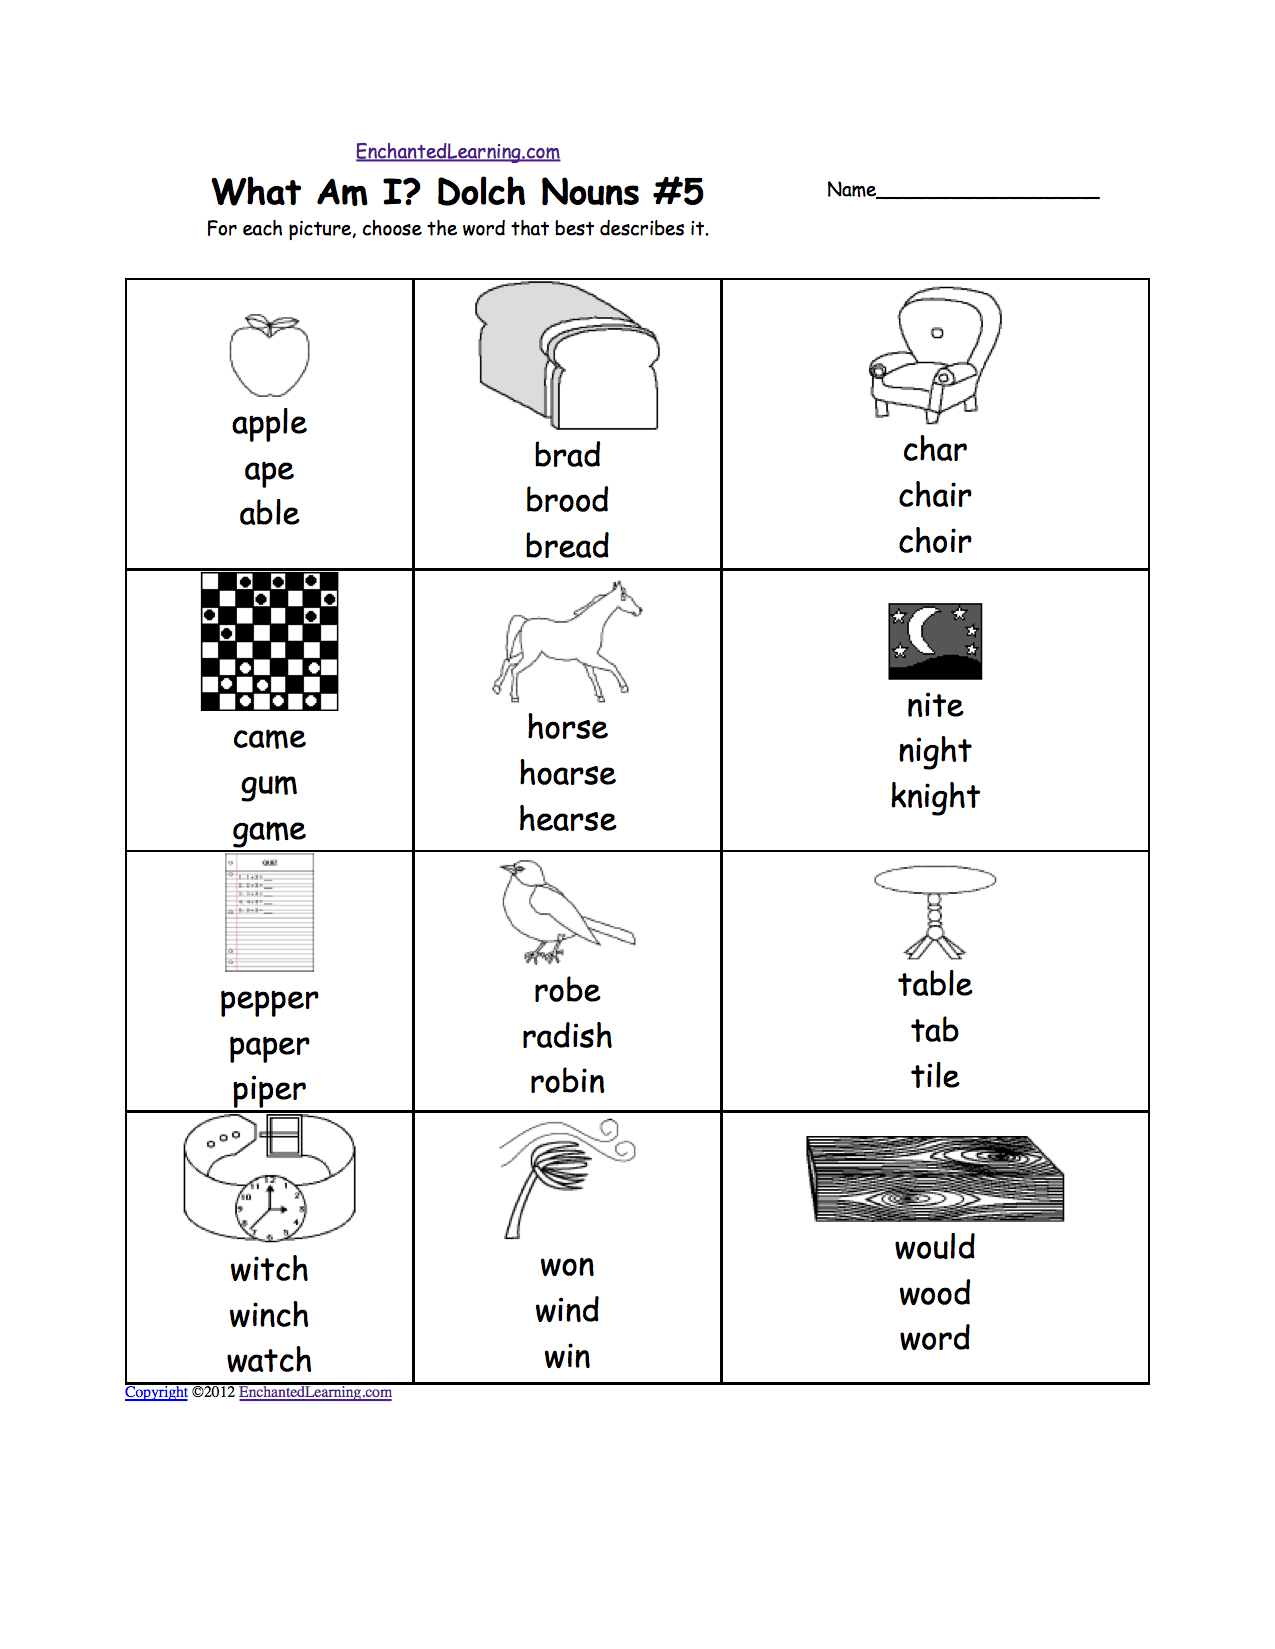 dolch-nouns-multiple-choice-spelling-words-at-enchantedlearning